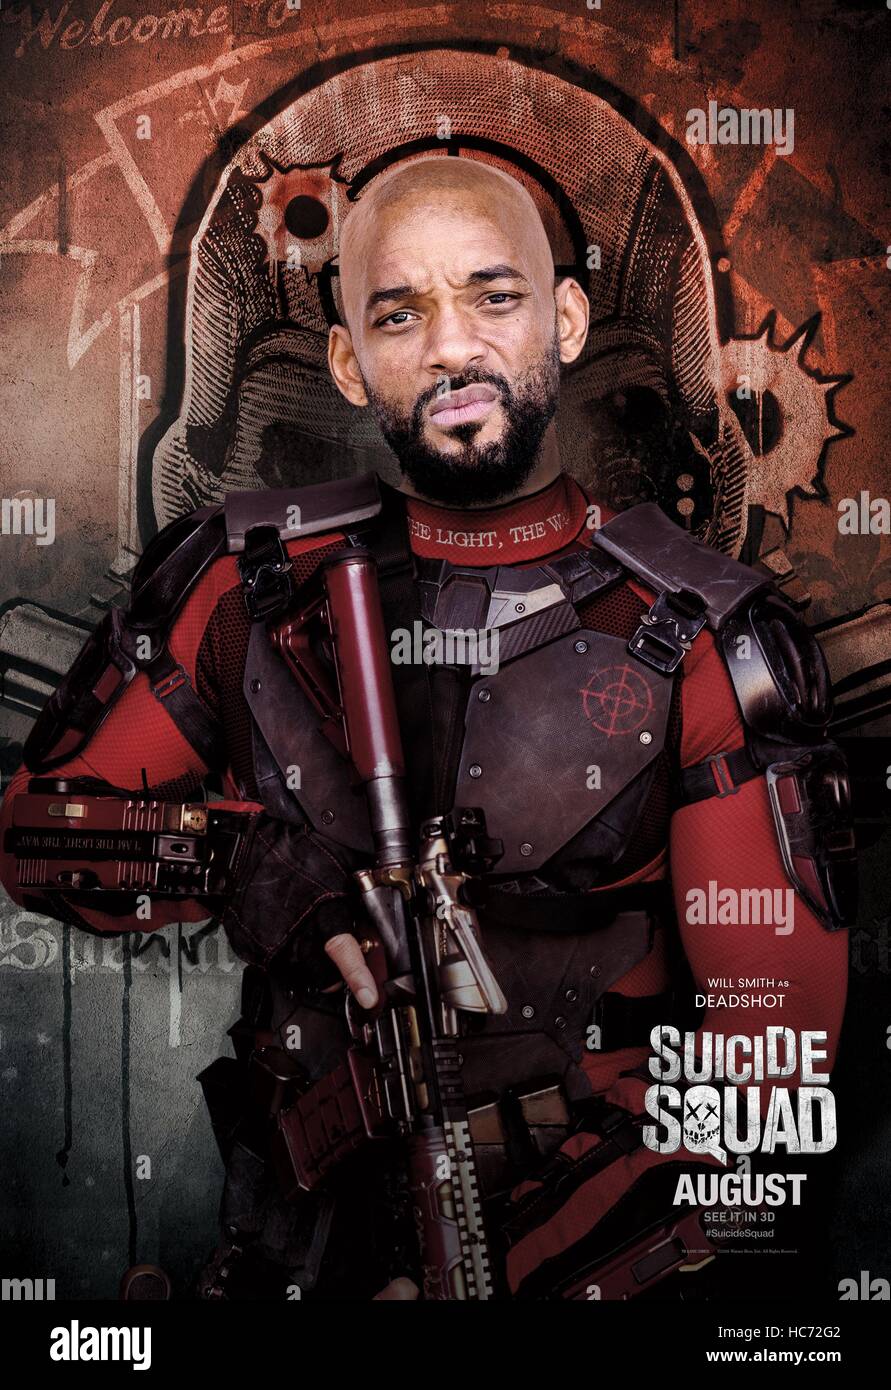 RELEASE DATE: August 5, 2016 TITLE: Suicide Squad STUDIO: Atlas Entertainment DIRECTOR: David Ayer PLOT: A secret government agency recruits imprisoned supervillains to execute dangerous black ops missions in exchange for clemency STARRING: Will Smith as Deadshot (Credit Image: c Atlas Entertainment/Entertainment Pictures/) Stock Photo